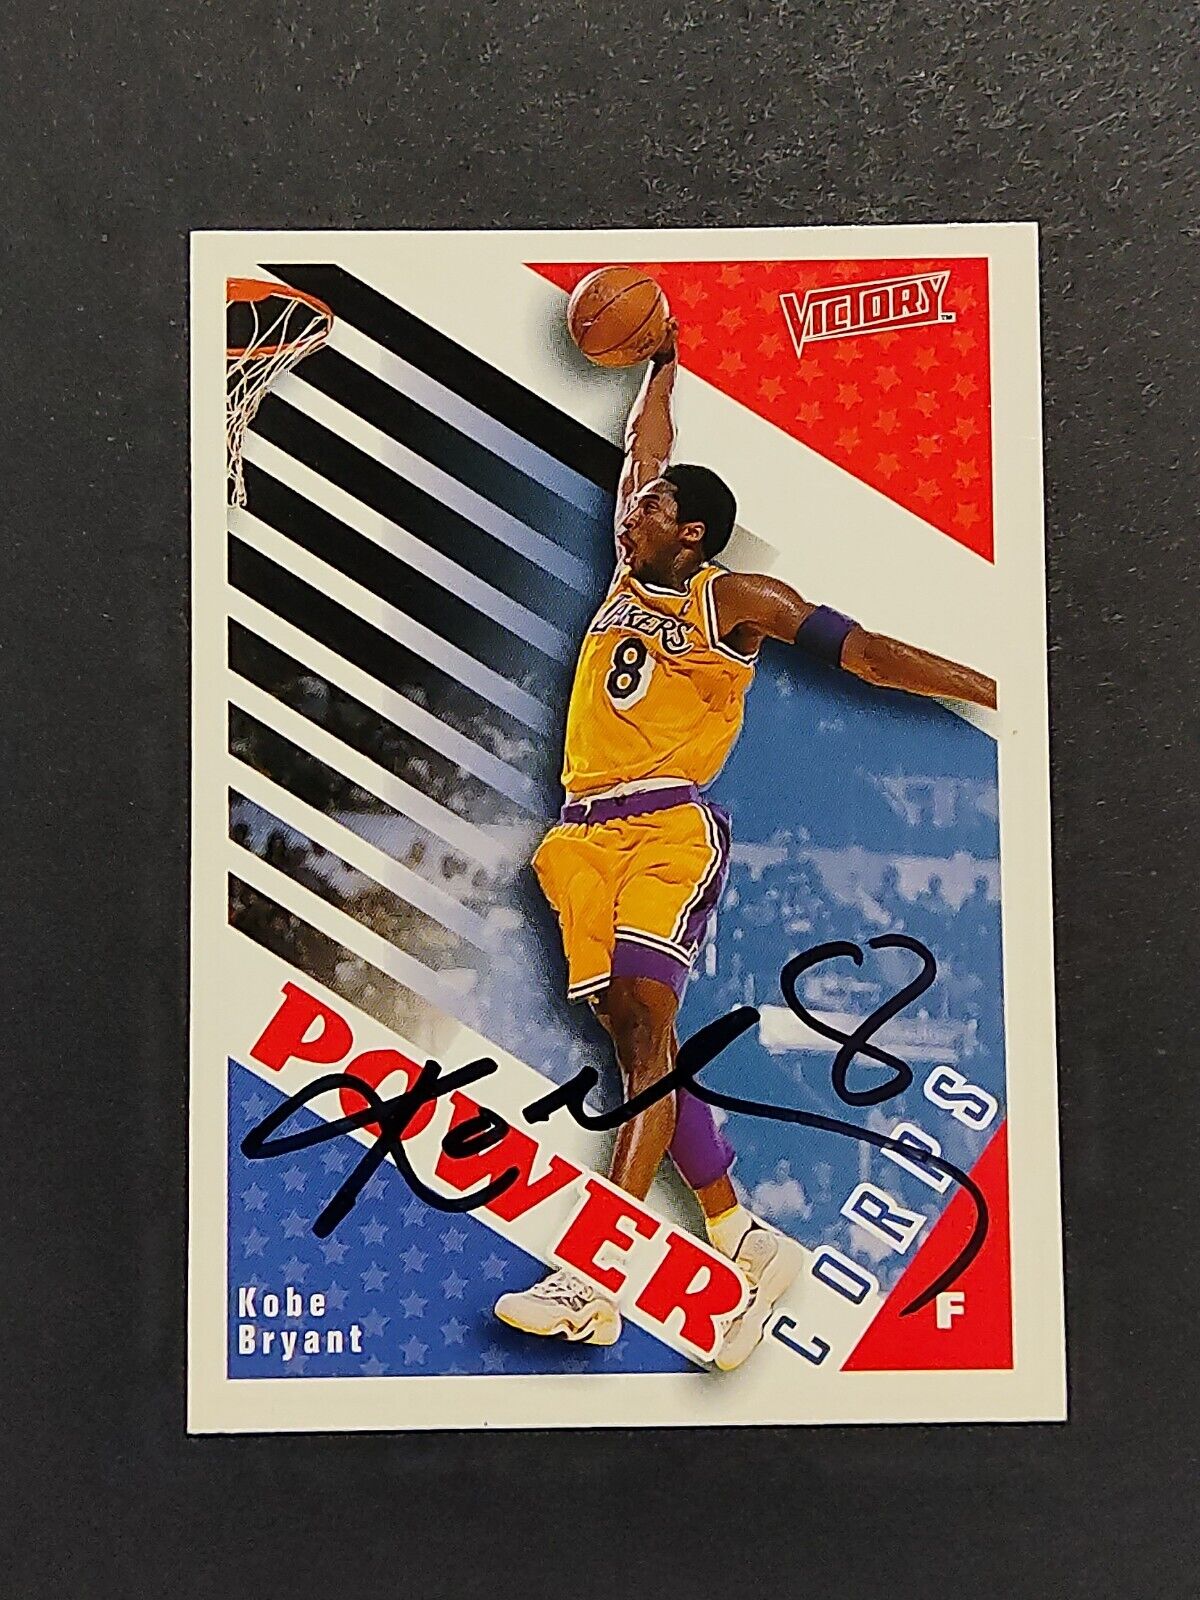 Kobe Bryant 1999 Ud Victory Power Corps Hand Signed Autograph Card #348 W/coa